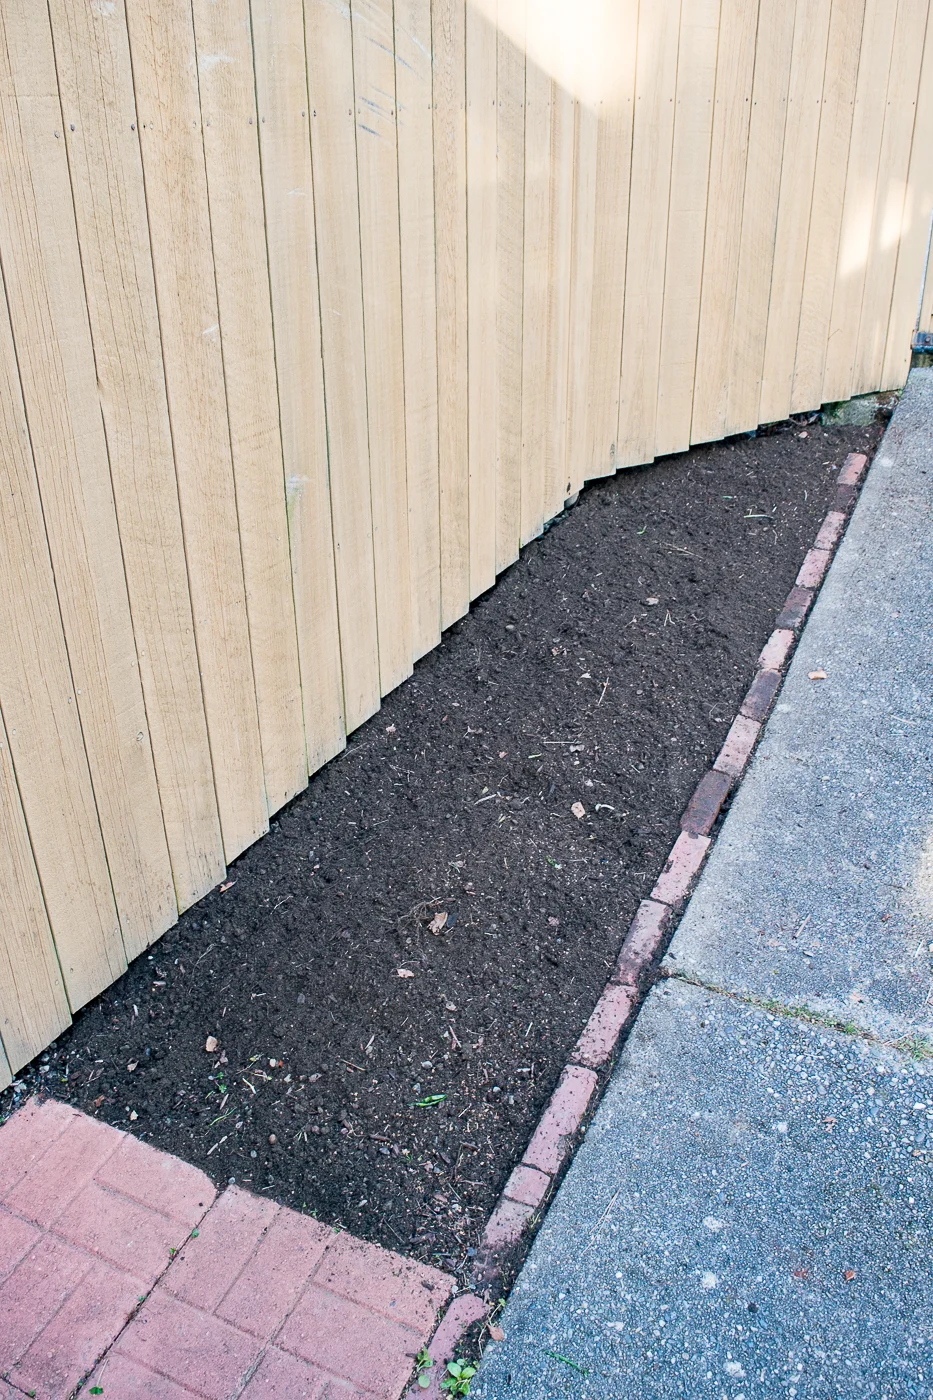 empty garden bed with bare fence next to concrete walkway lined with bricks